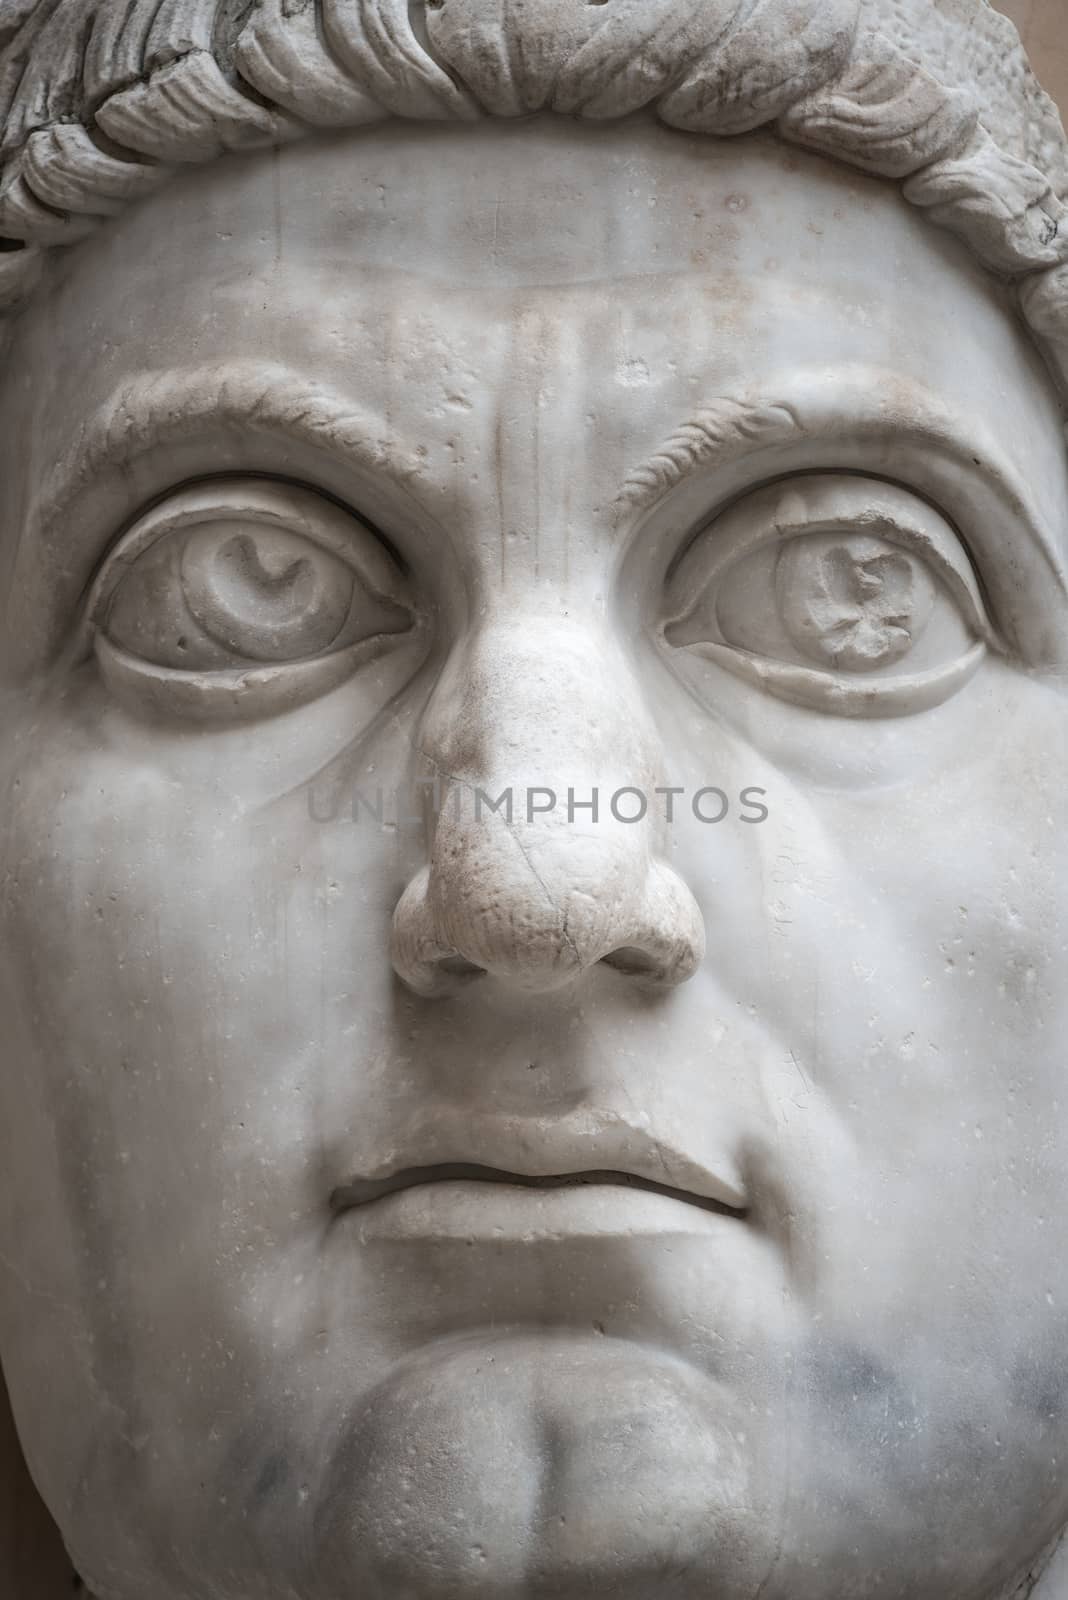 Statue of Colossus of Constantine the Great in Rome, Italy, 2014